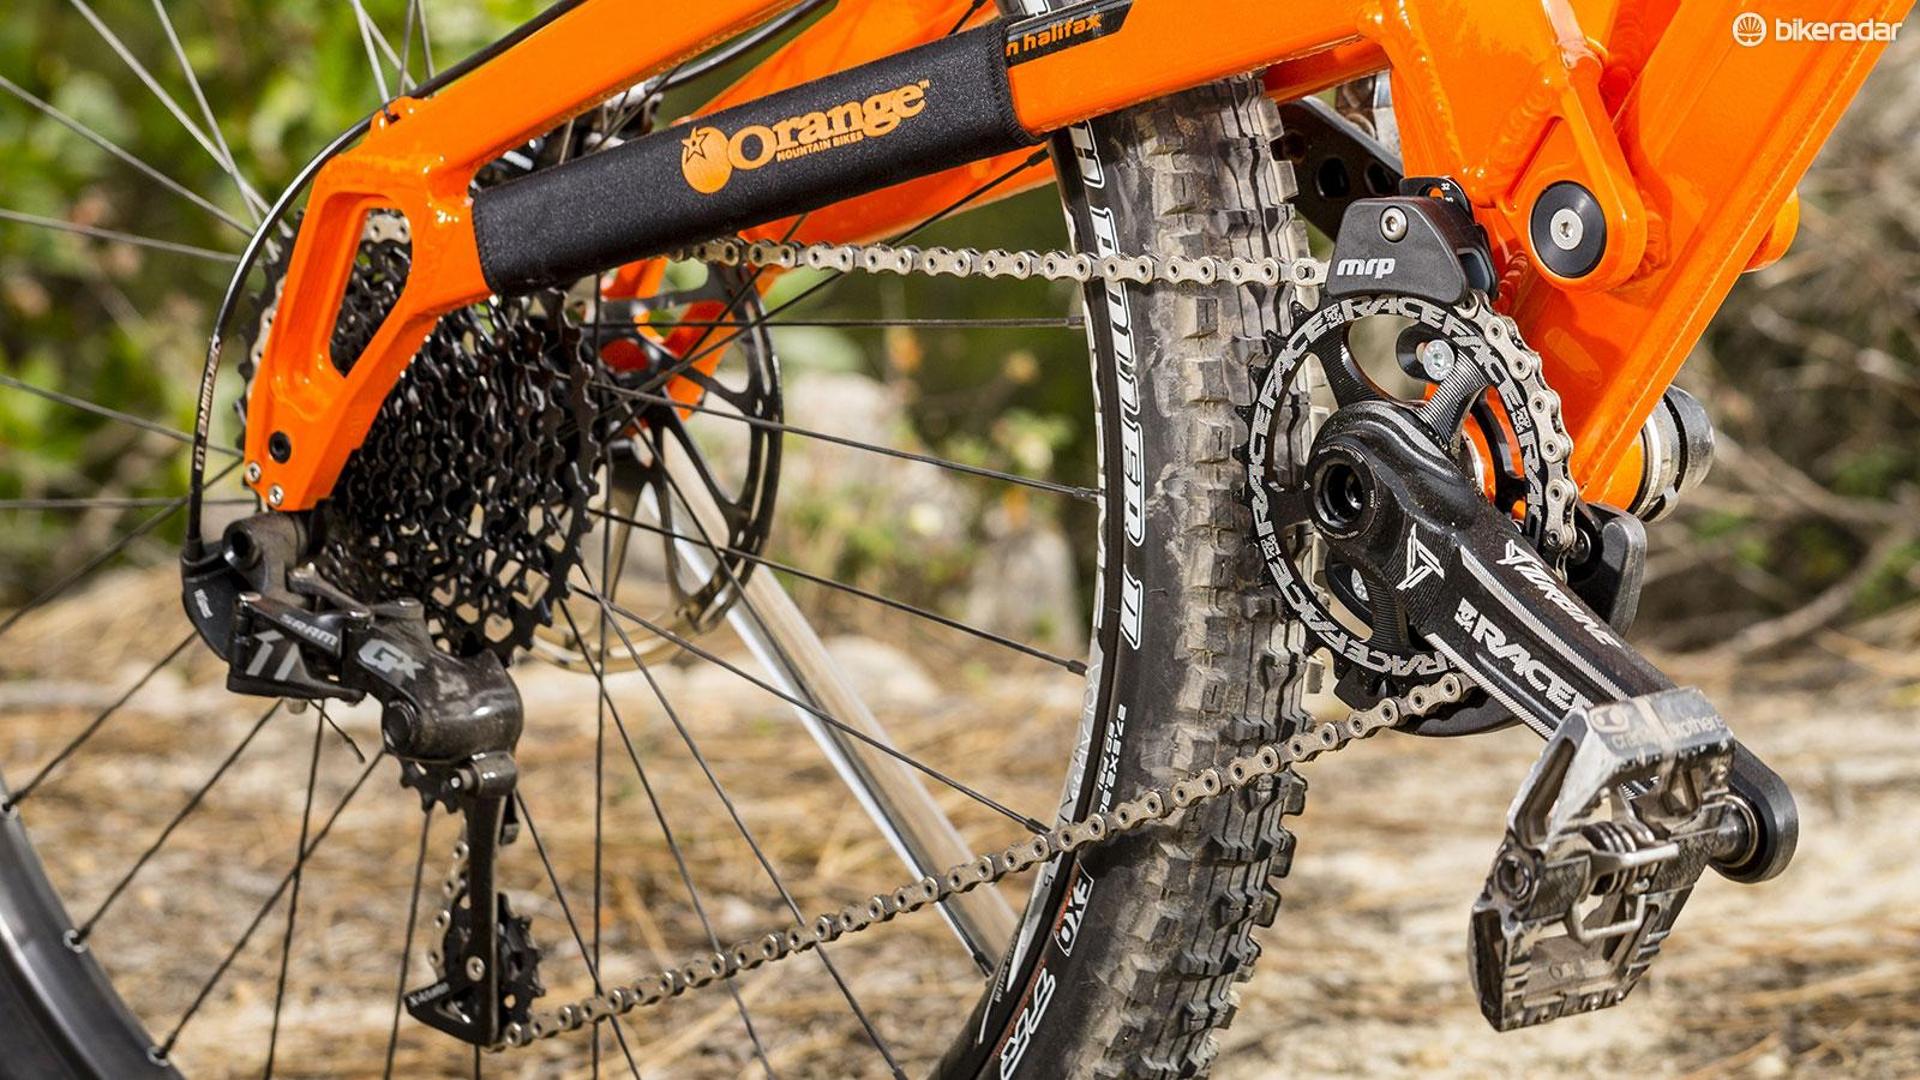 West Yorkshire mountain bike makers acquired out of administration